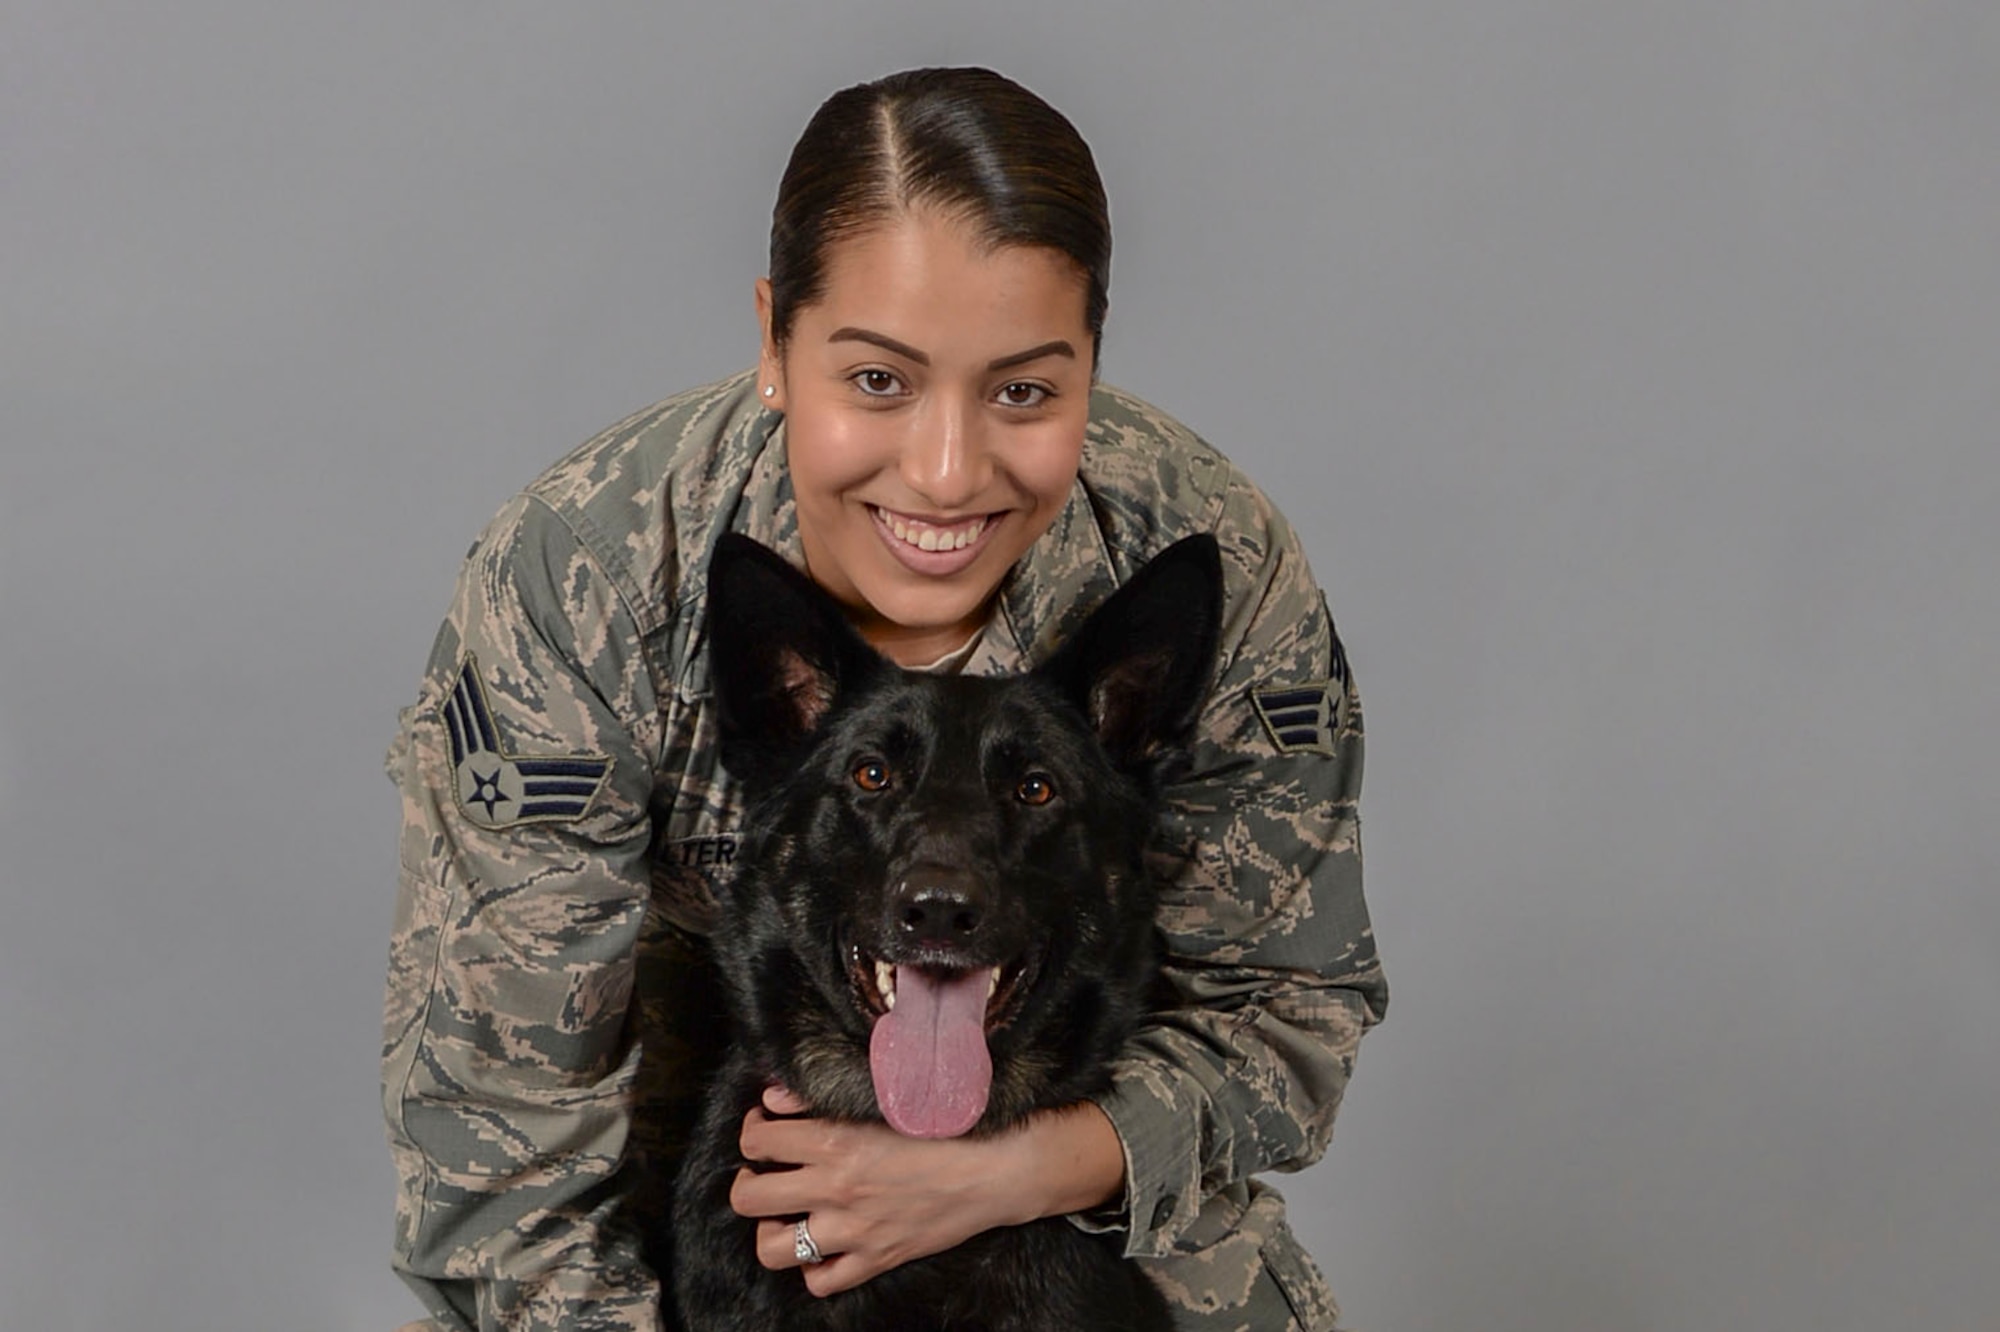 Senior Airman Katherine Walters, 375th Air Mobility Wing Public Affairs broadcast journalist, and her German Shepherd, Jodi, have been utilizing the Scott Air Force Base Veterinary Treatment Facility for 2 years. Walters has greatly appreciated the amount of care and support her and Jodi have received at the clinic. (U.S. Air Force photo by Senior Airman Melissa Estevez)